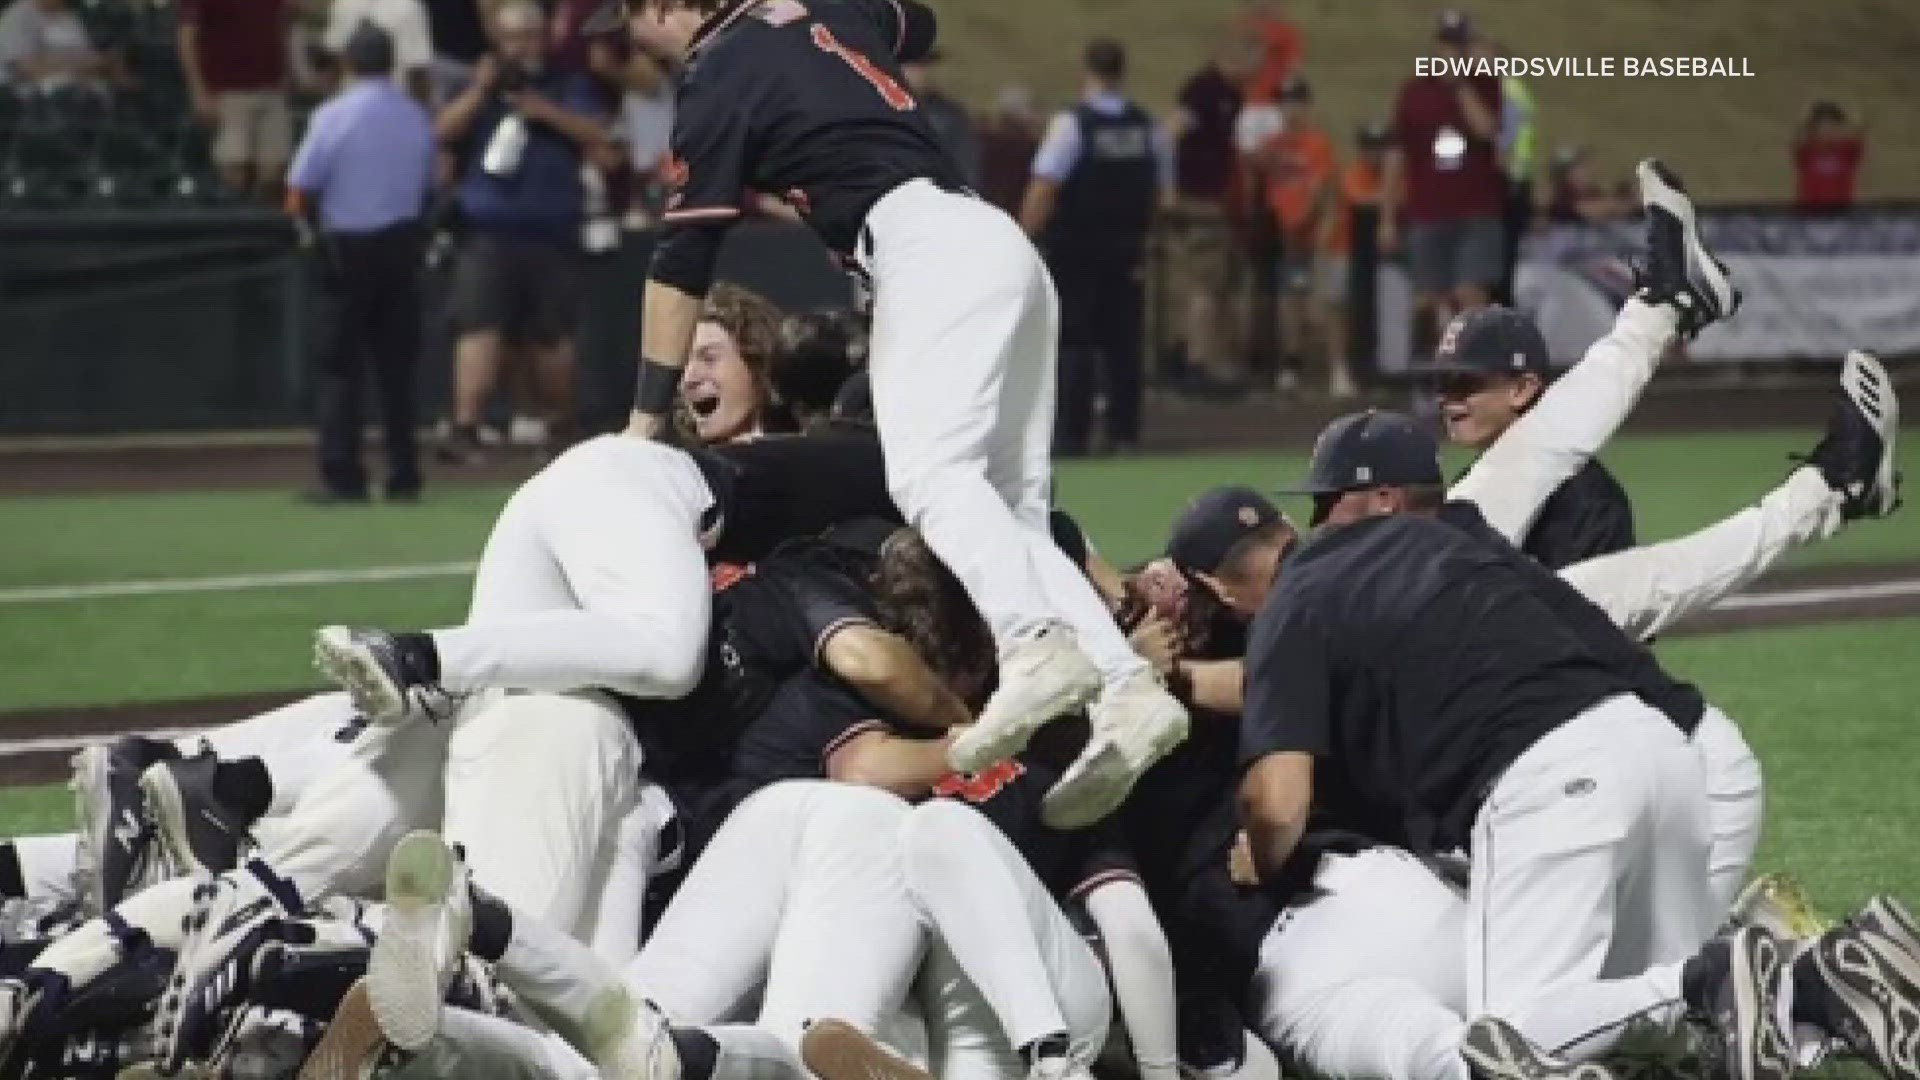 At Edwardsville High School, baseball is a serious business. But this year, the Tigers pulled off the back-to-back for the first time ever.